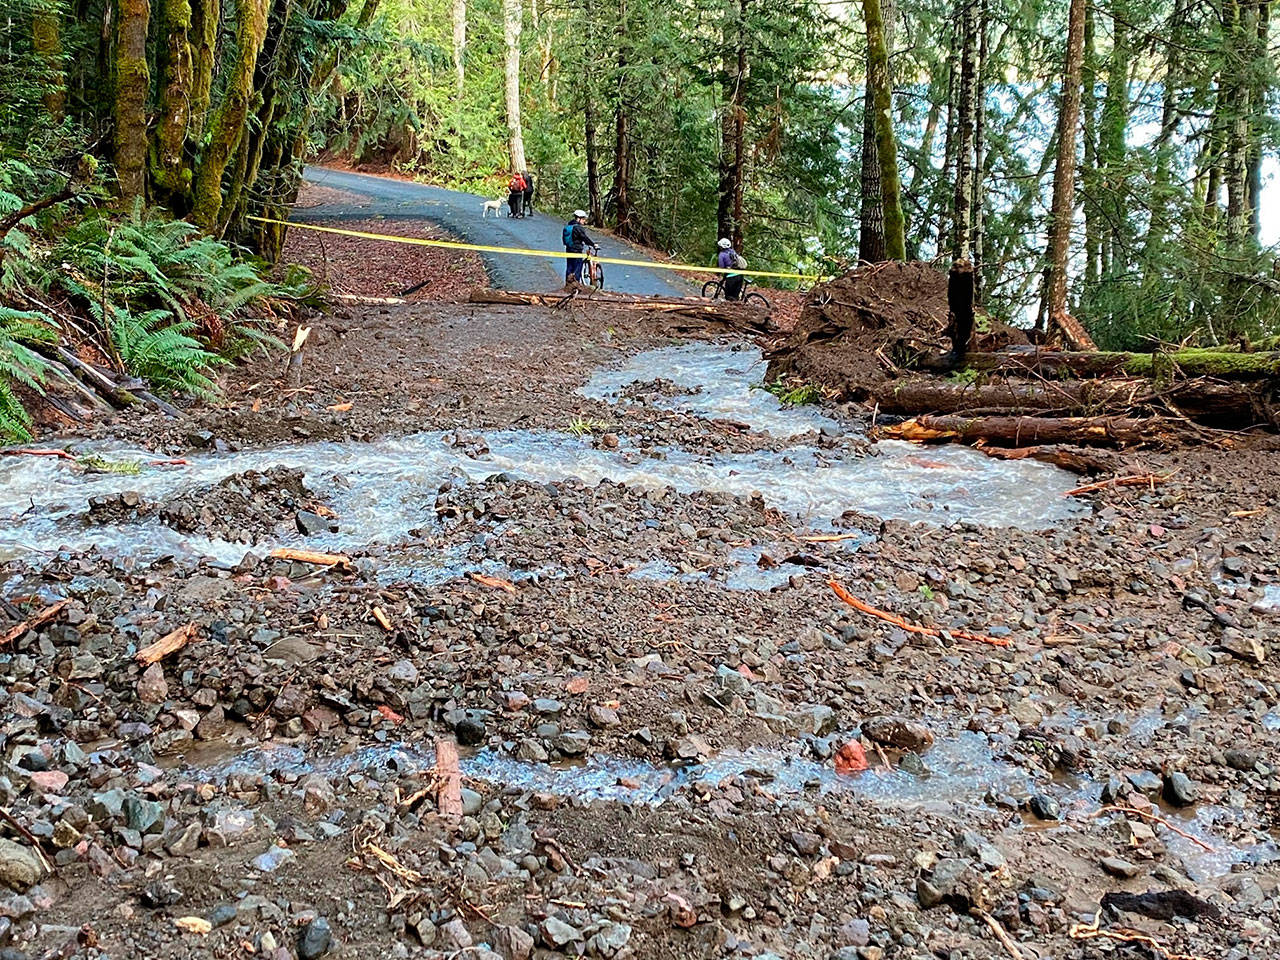 A landslide blocks safe passage along the Spruce Railroad Trail. Olympic National Park officials said heavy rain was the cause. (Photo courtesy of Noel Carey)